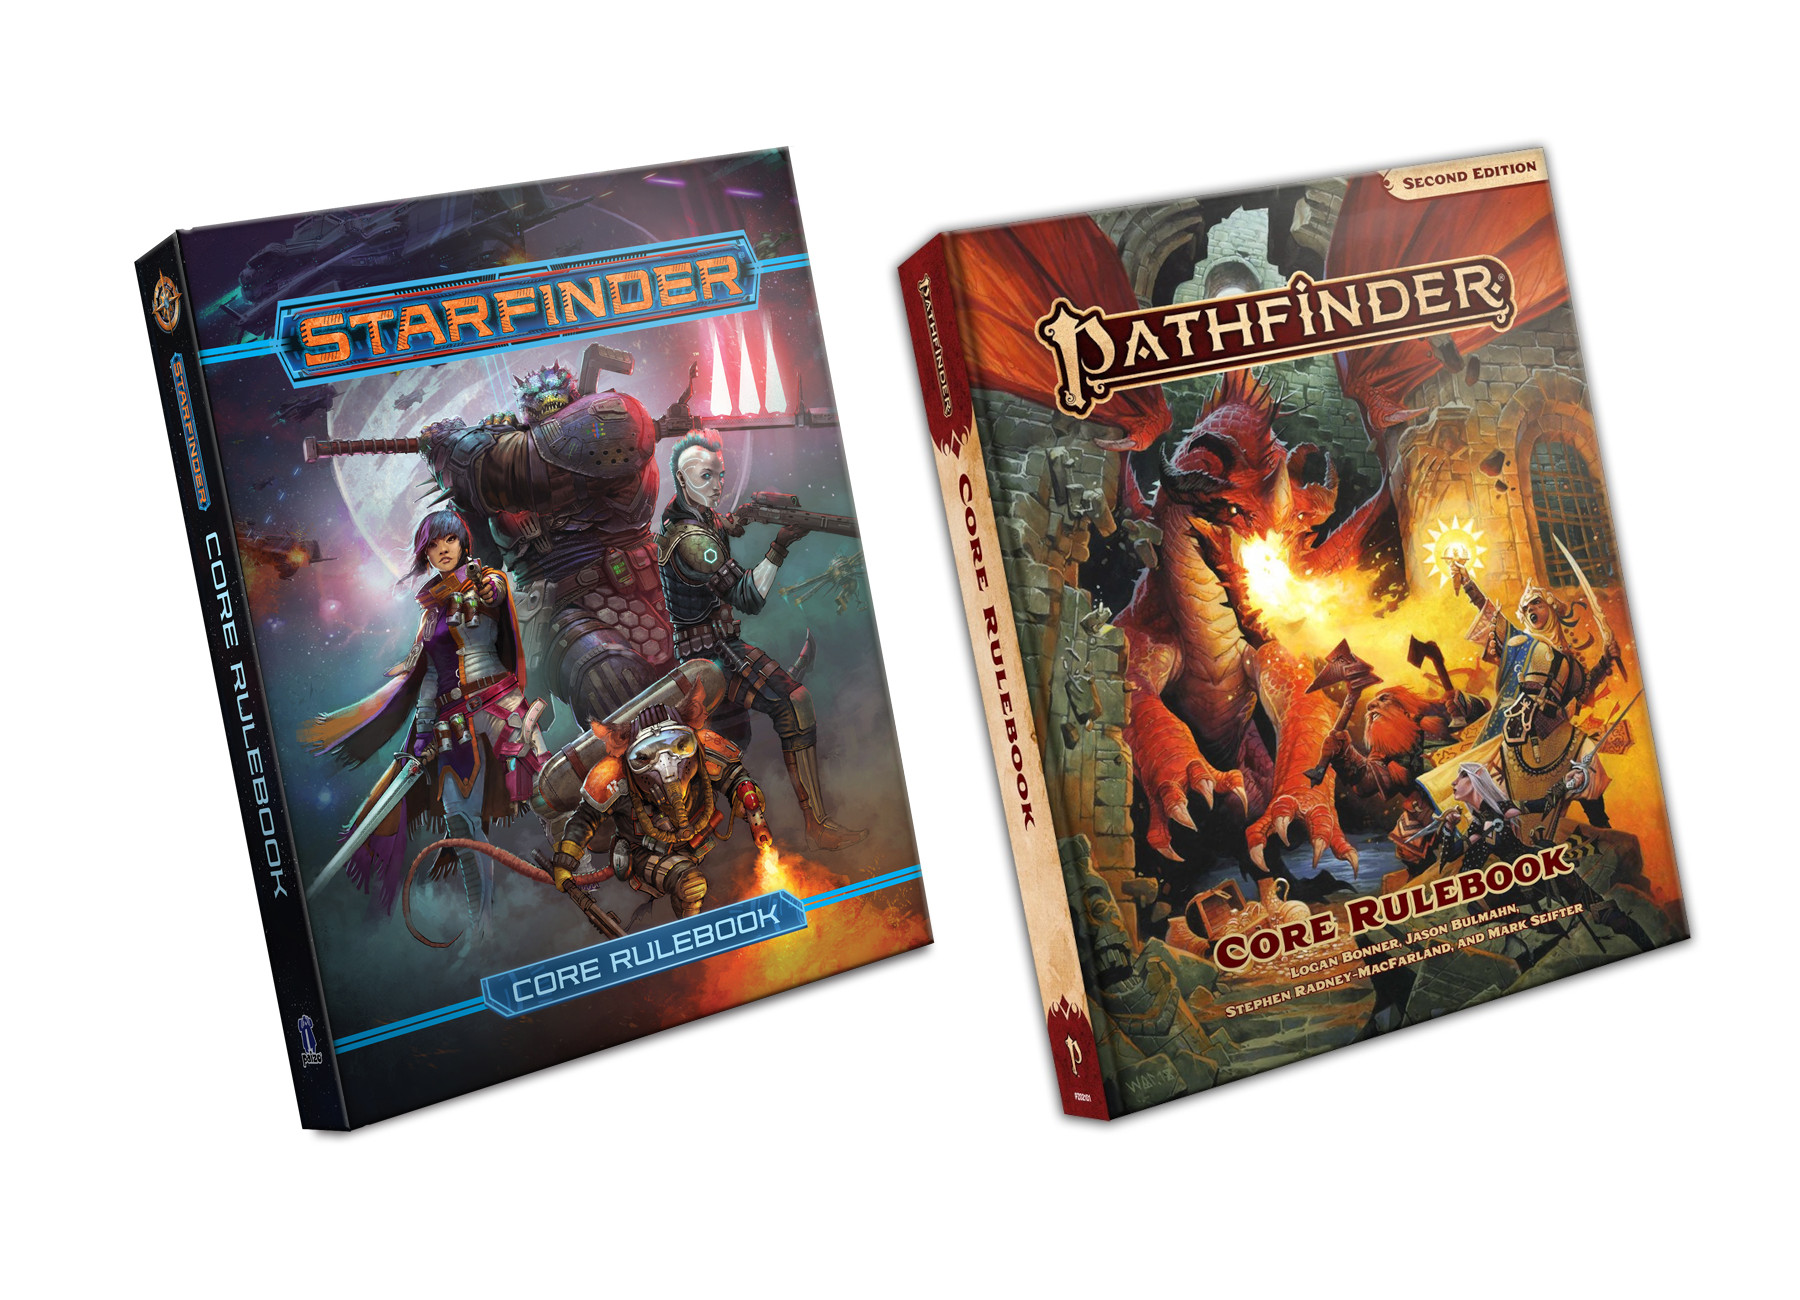 (12.58$) Pathfinder Second Edition Core Rulebook and Starfinder Core Rulebook Digital CD Key